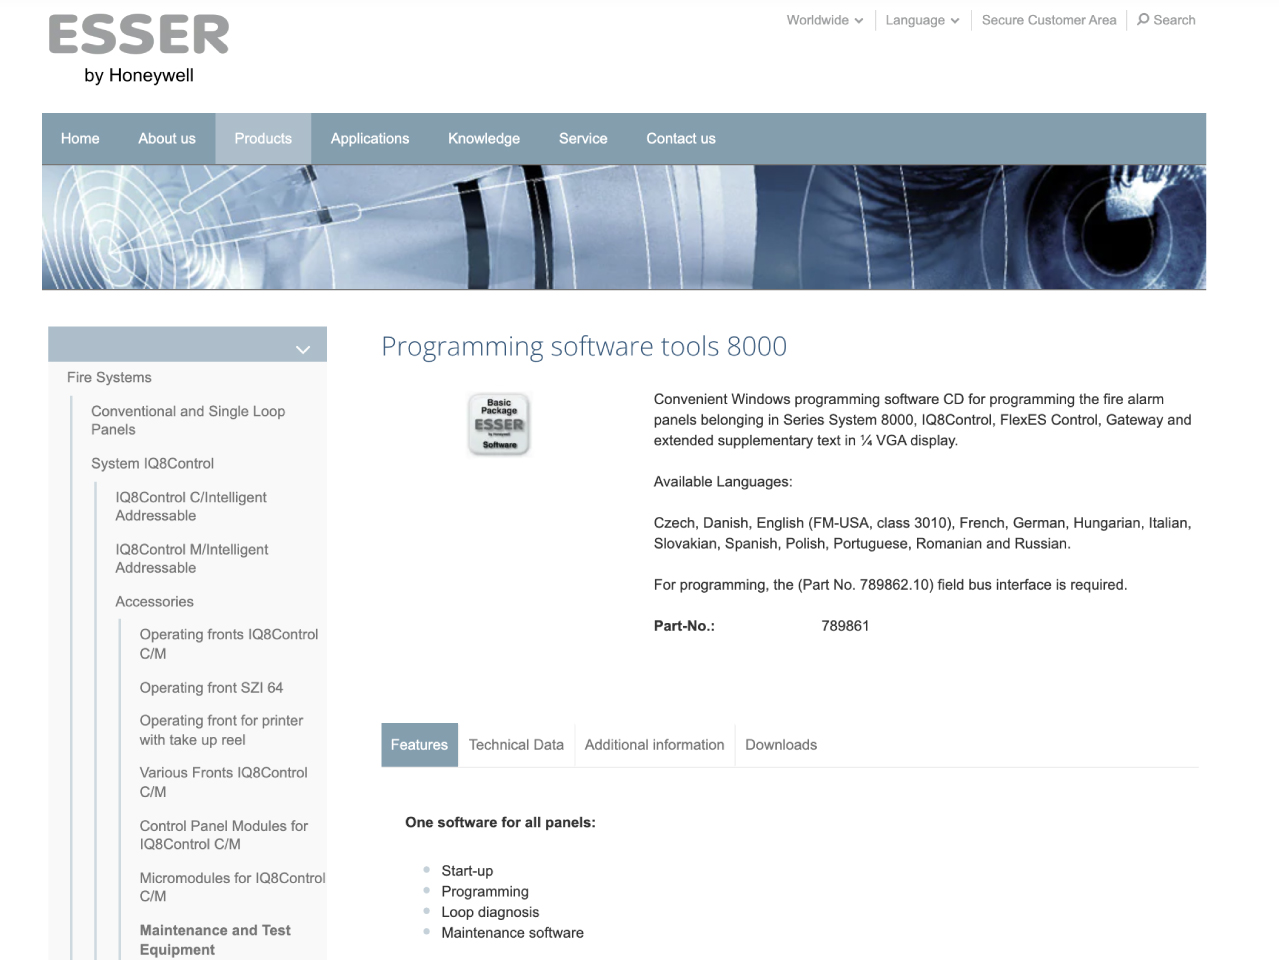 link to Programming software tools 8000